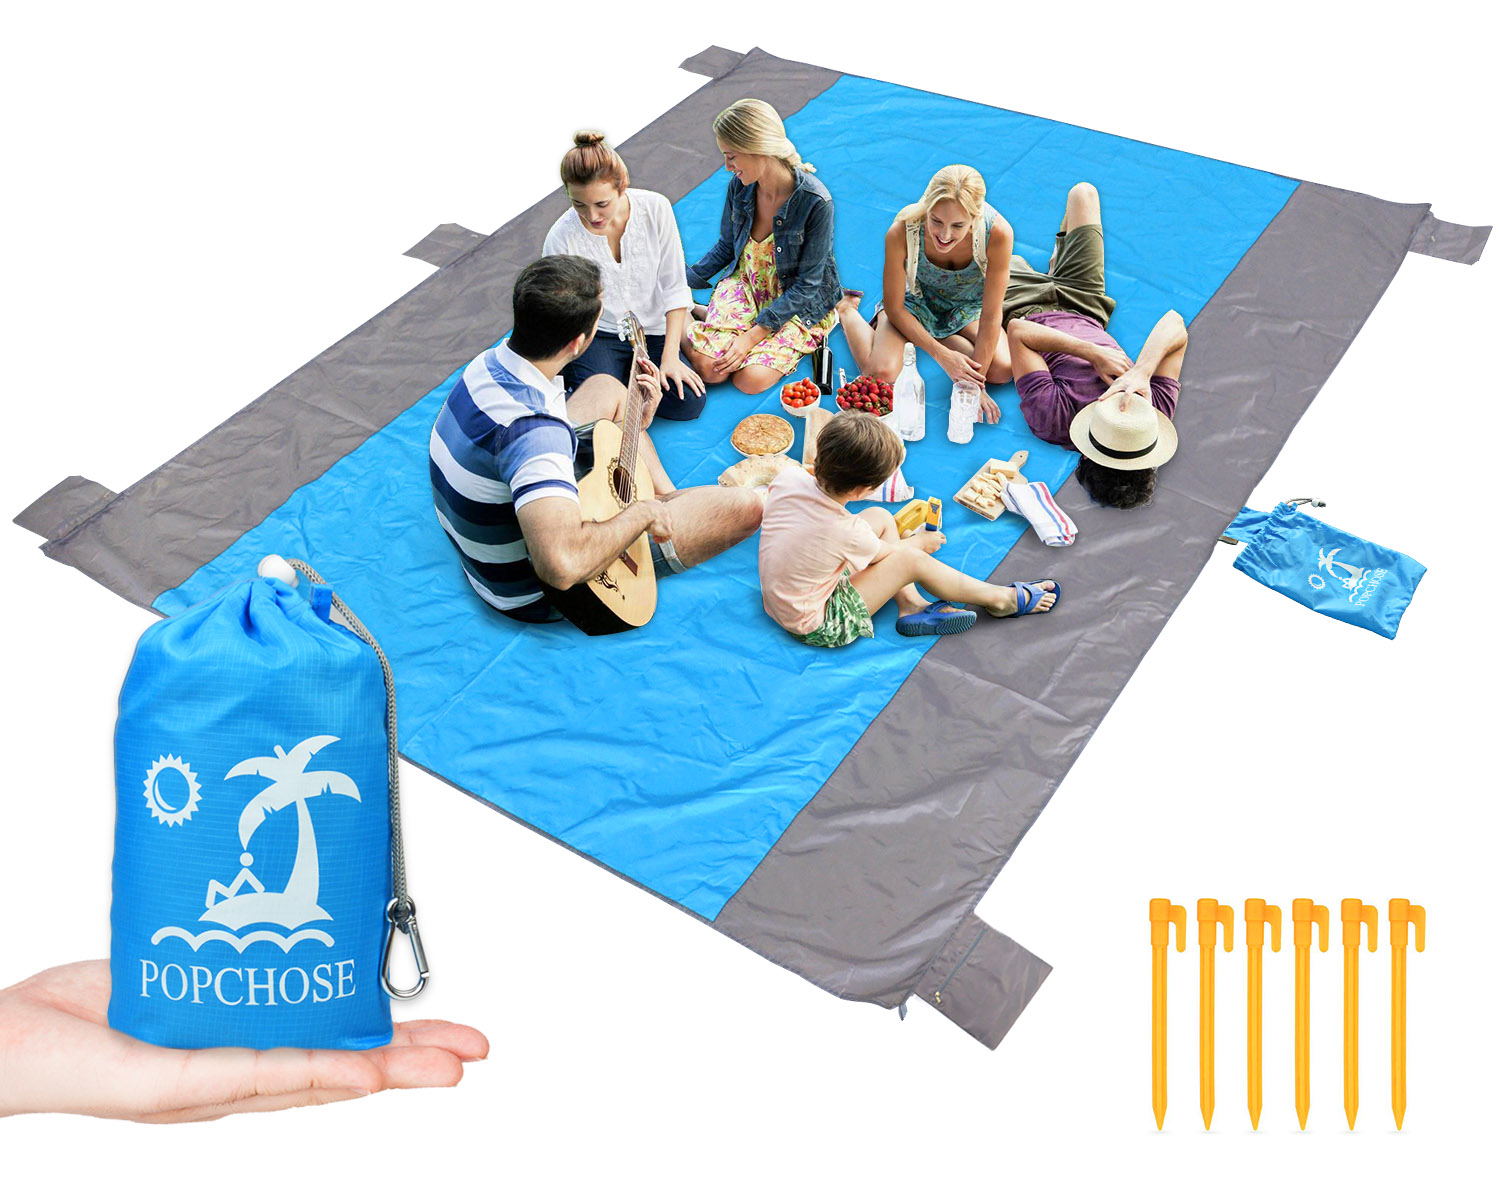 Large Sandproof Beach Mat for 4-7 Adults Outdoor Blanket for Travel Hiking POPCHOSE Sandfree Beach Blanket Waterproof Pocket Picnic Blanket with 6 Stakes Camping 